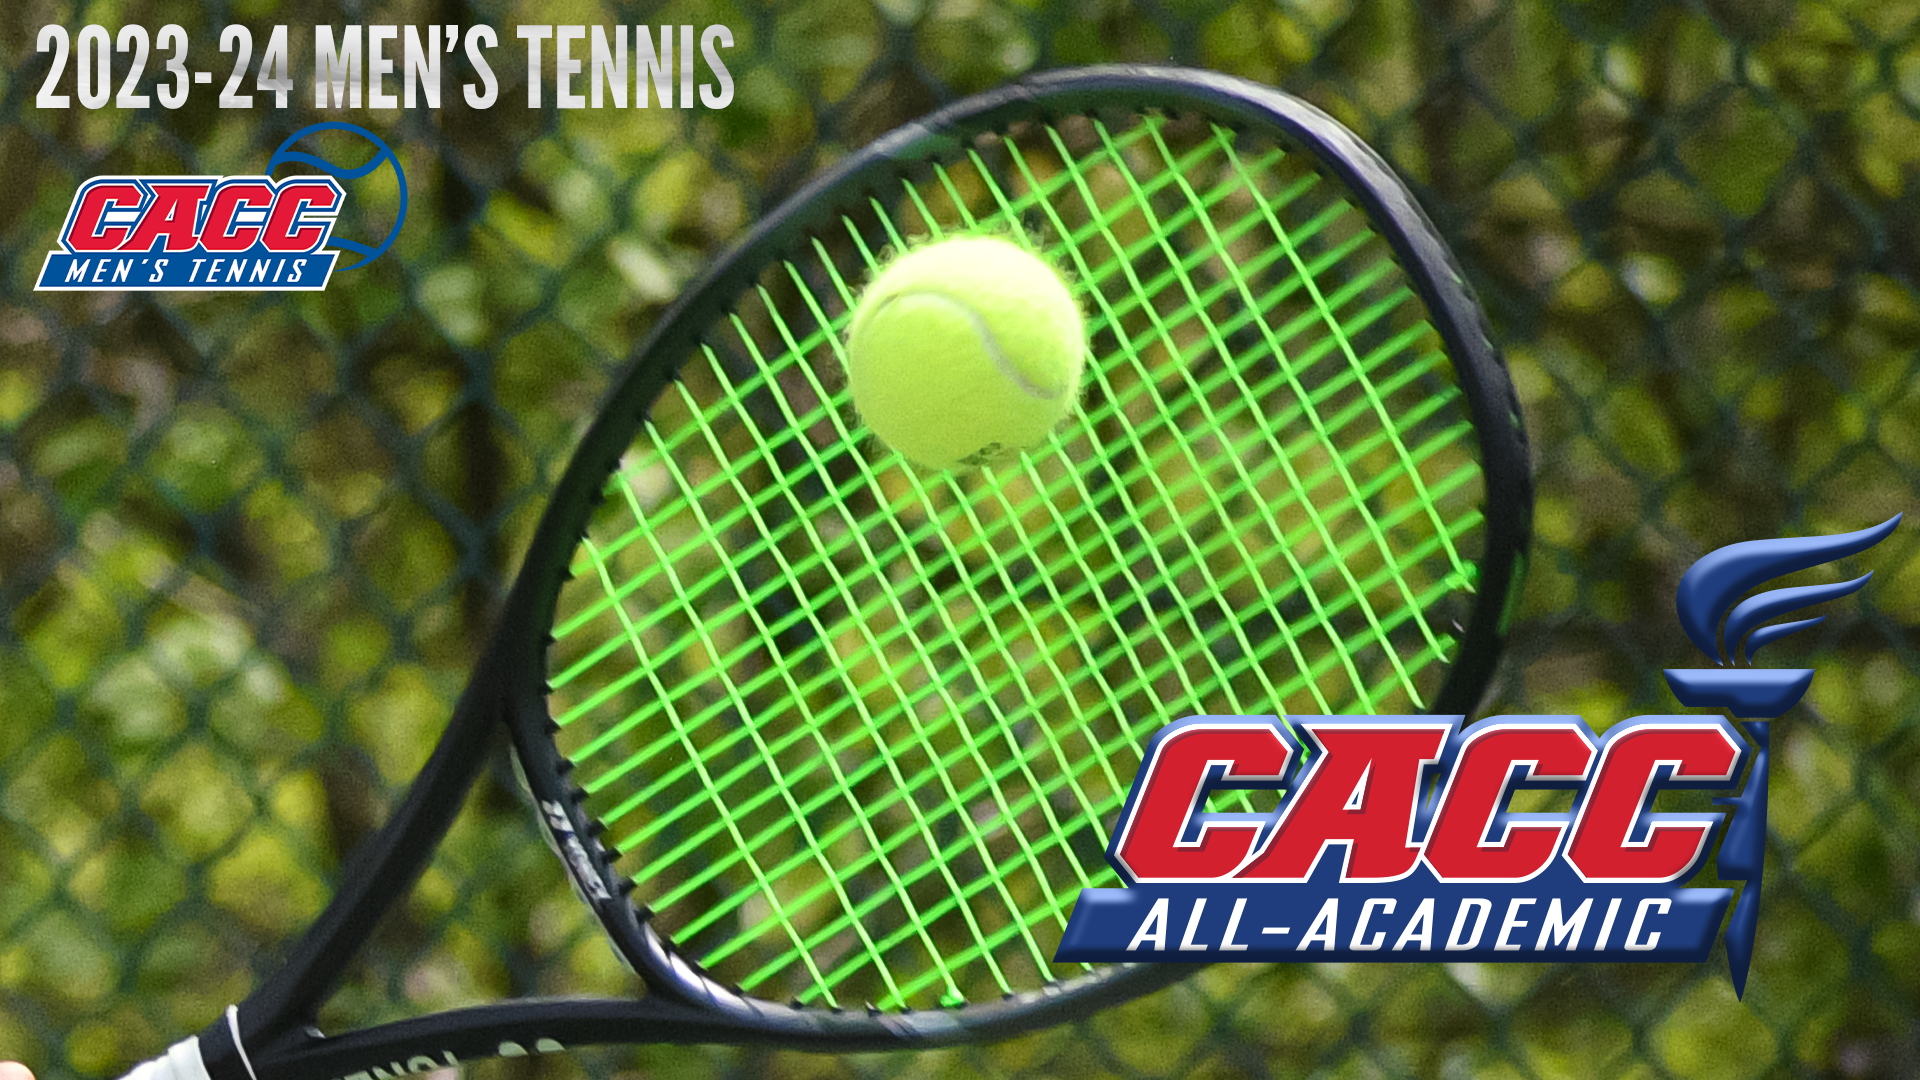 16 S-As Named to '23'-24 CACC MTEN All-Academic Team